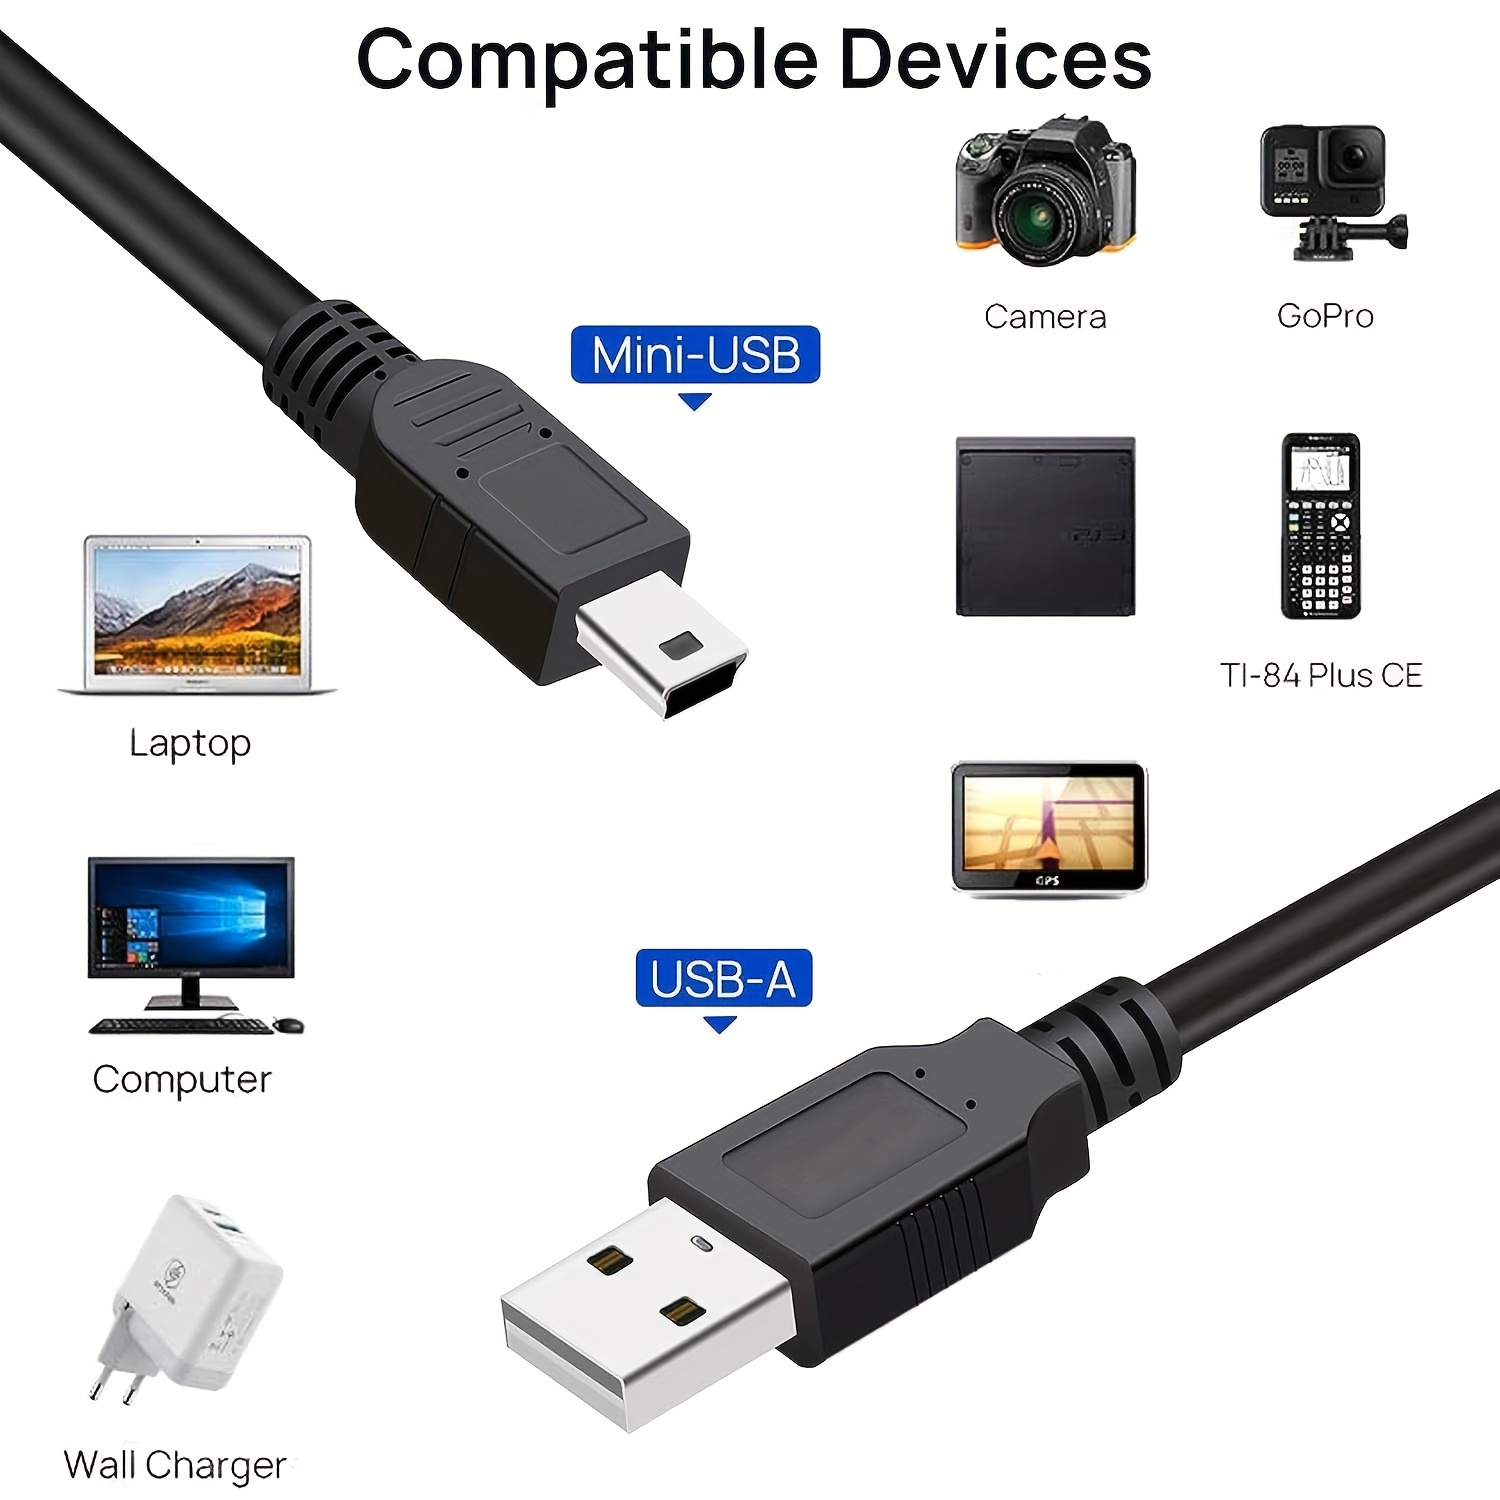 Replacement Micro-USB Power Cord for Dash Cams and other Devices